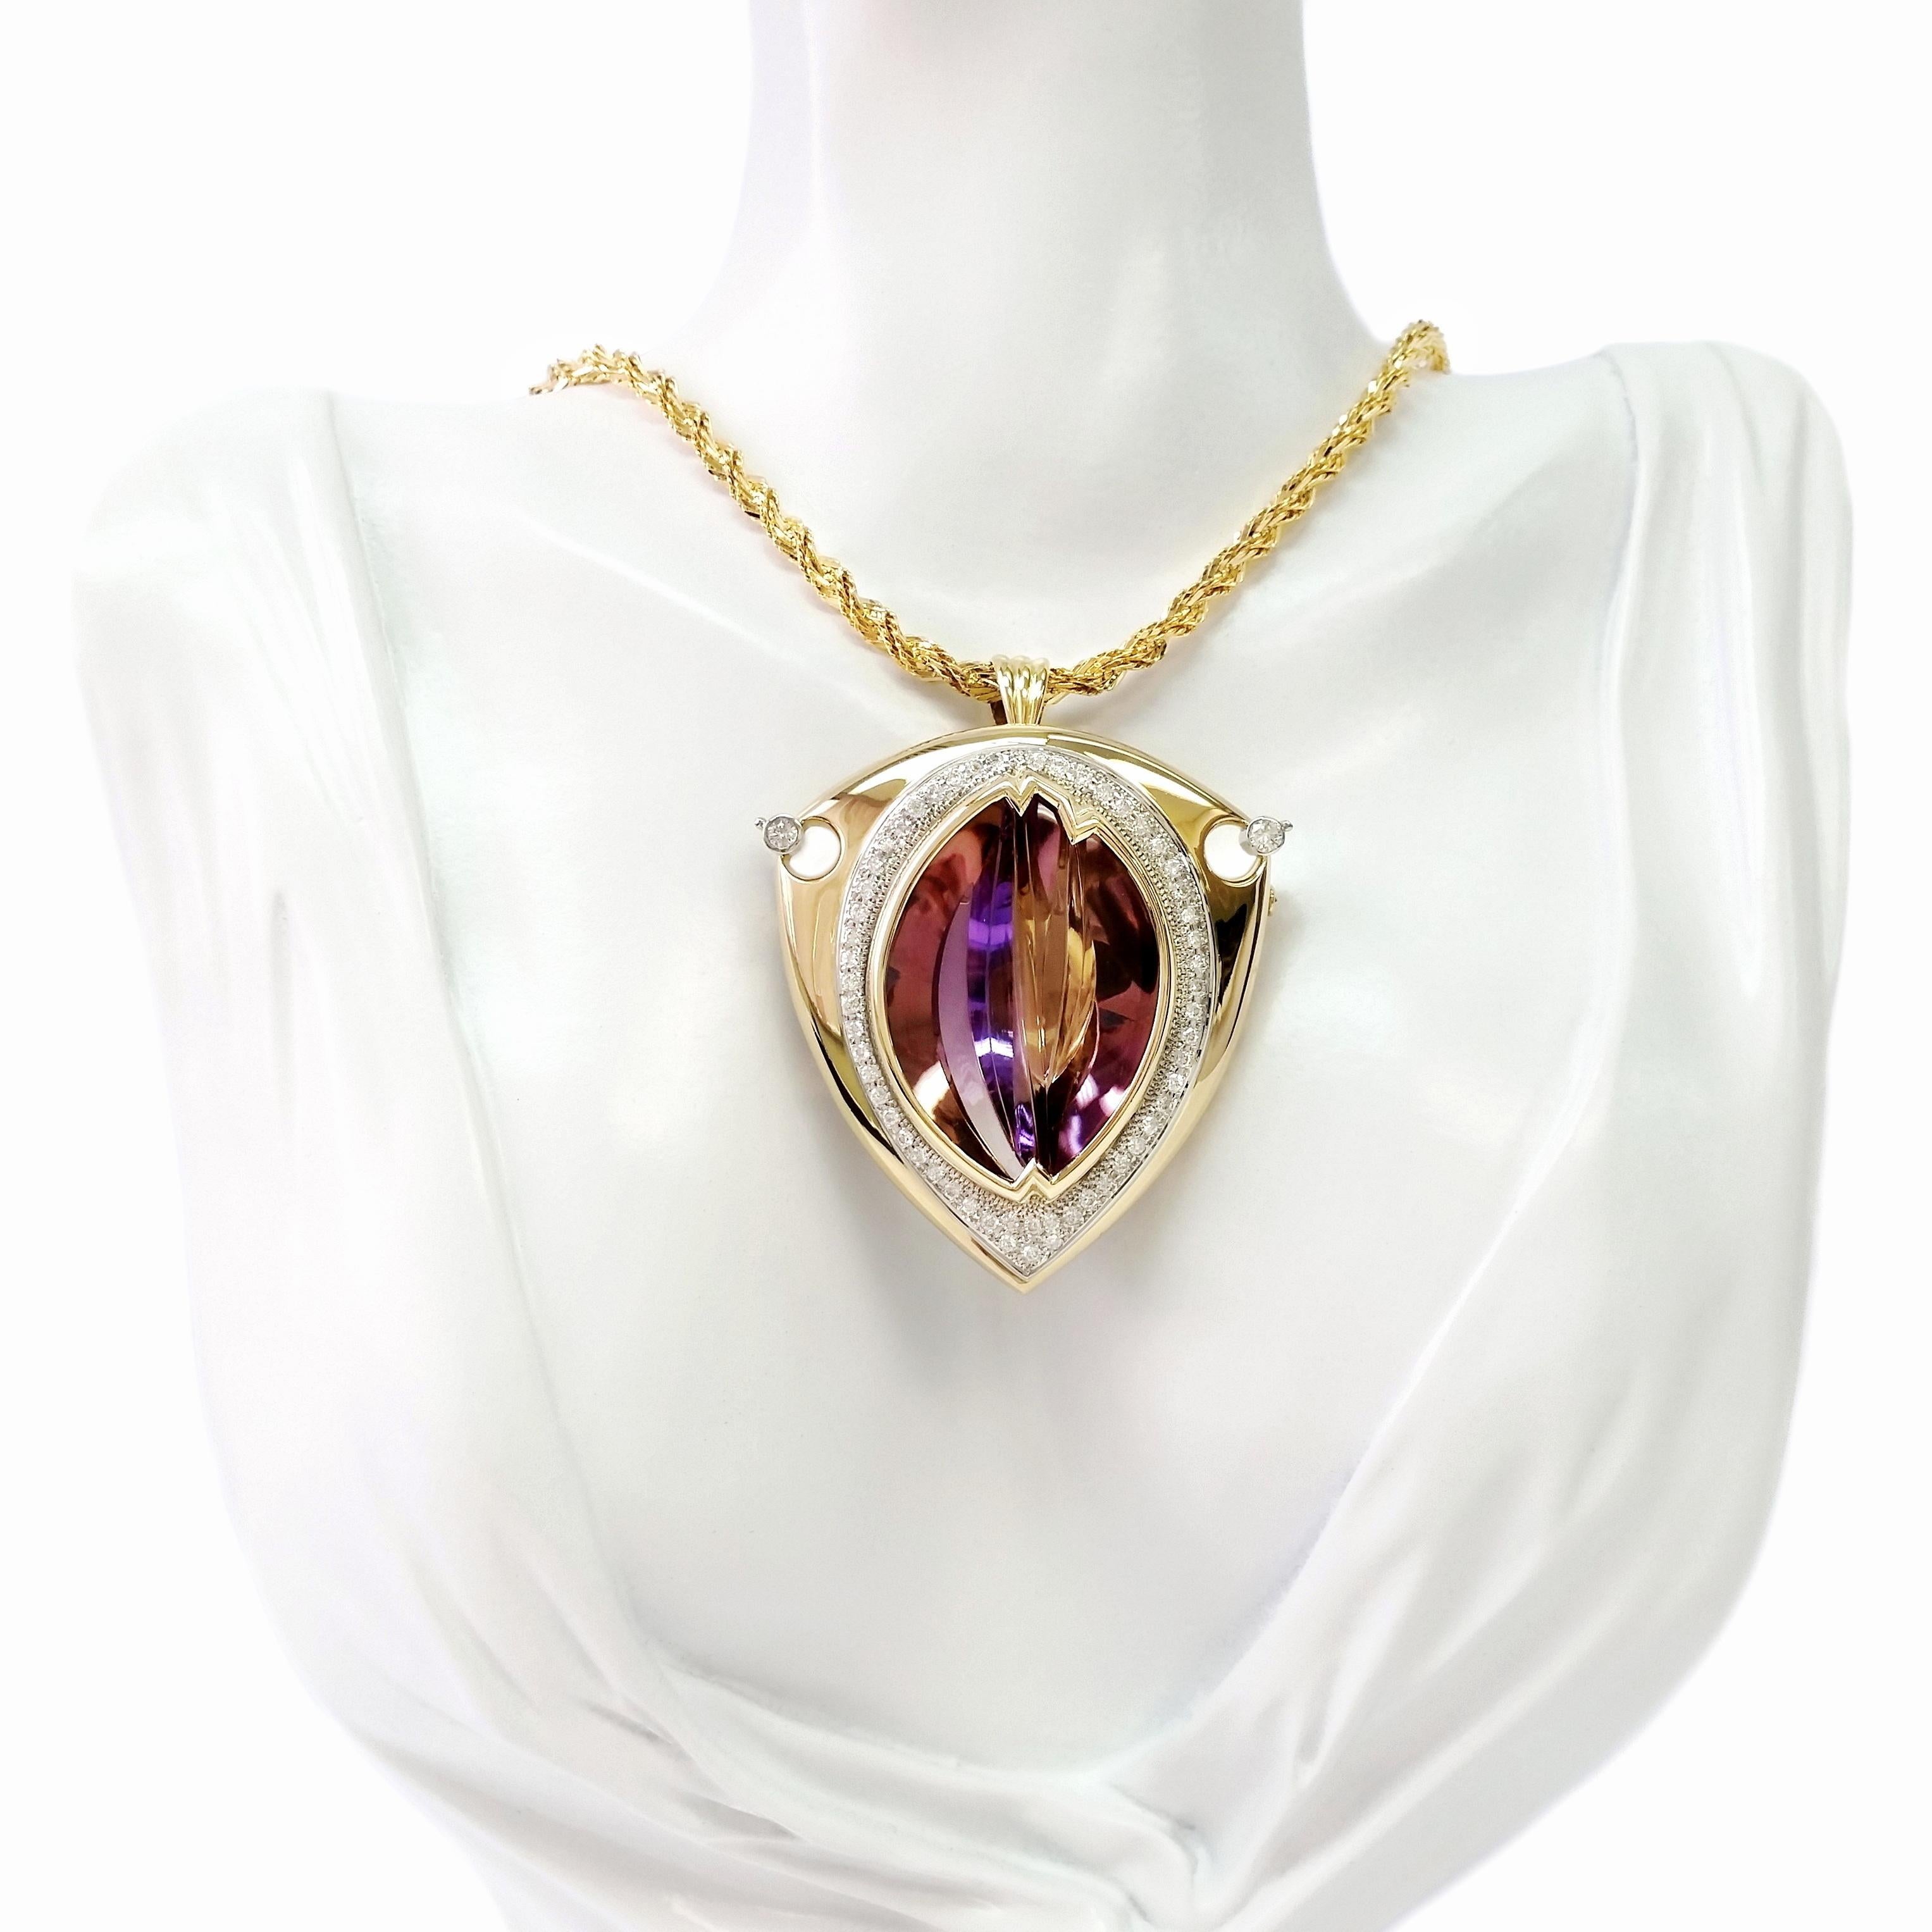 Experience the pinnacle of luxury with our Top Crown Jewelry versatile and opulent brooch/necklace, expertly crafted in platinum and 18K yellow gold. This magnificent piece features a regal 57.07ct IGI Certified Natural Purple Amethyst, elegantly